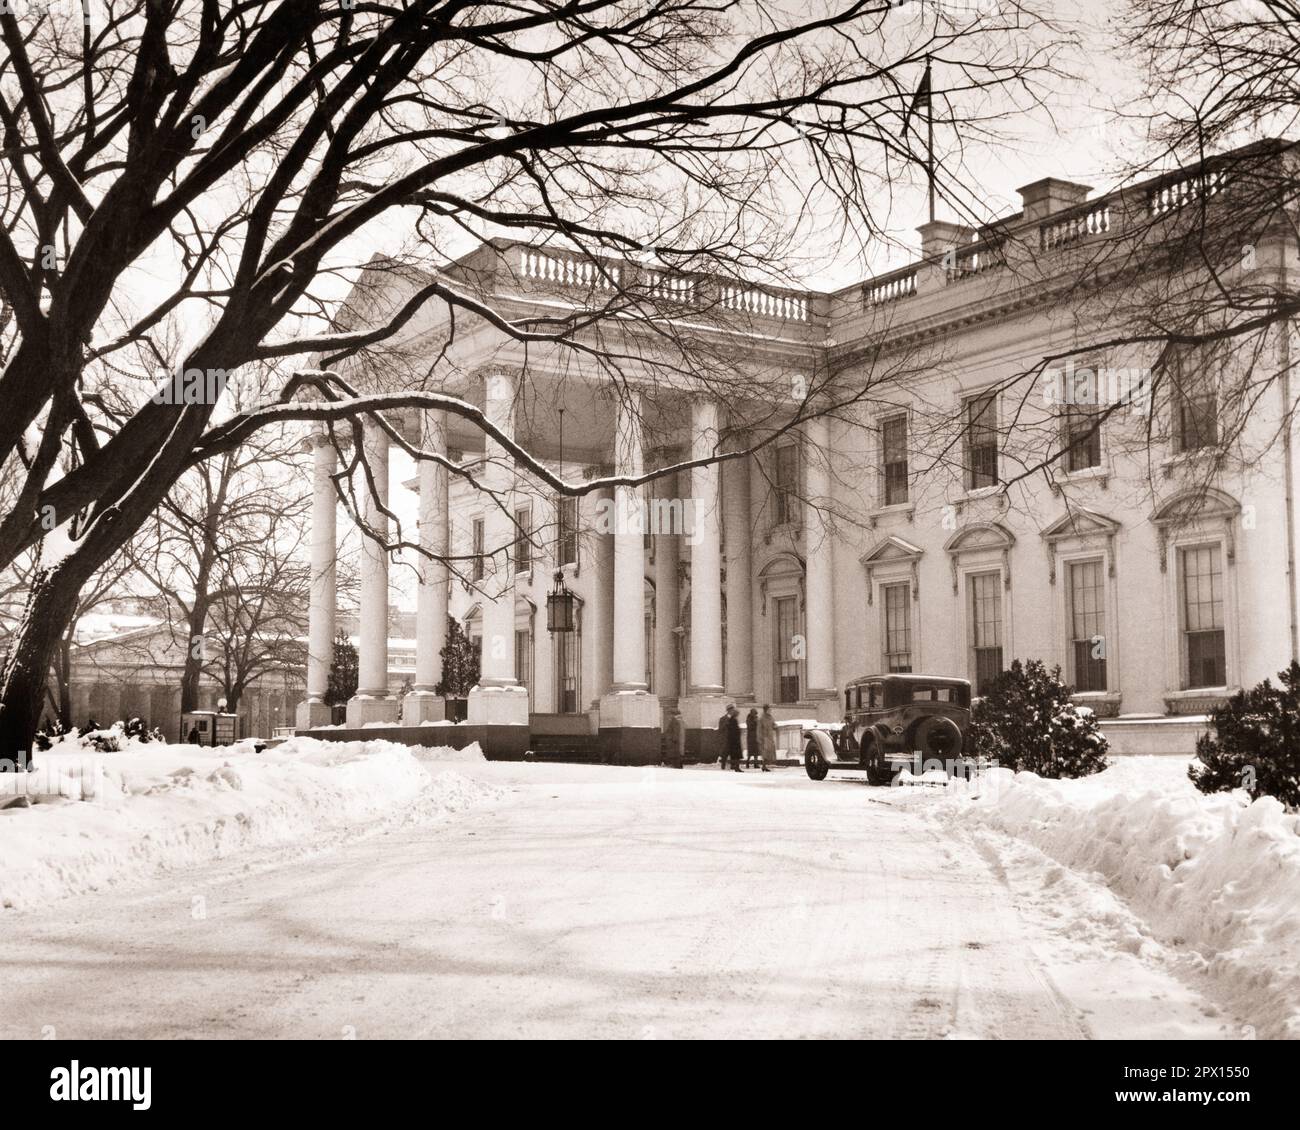 1930s NORTH FACING FACADE OF THE WHITE HOUSE SURROUNDED BY WINTER SNOW WASHINGTON DC USA - q75049 CPC001 HARS THE WHITE HOUSE WINTERY CONCEPTS FACADE BLACK AND WHITE DISTRICT FEDERAL OLD FASHIONED PORTICO REPRESENTATION WHITE HOUSE Stock Photo